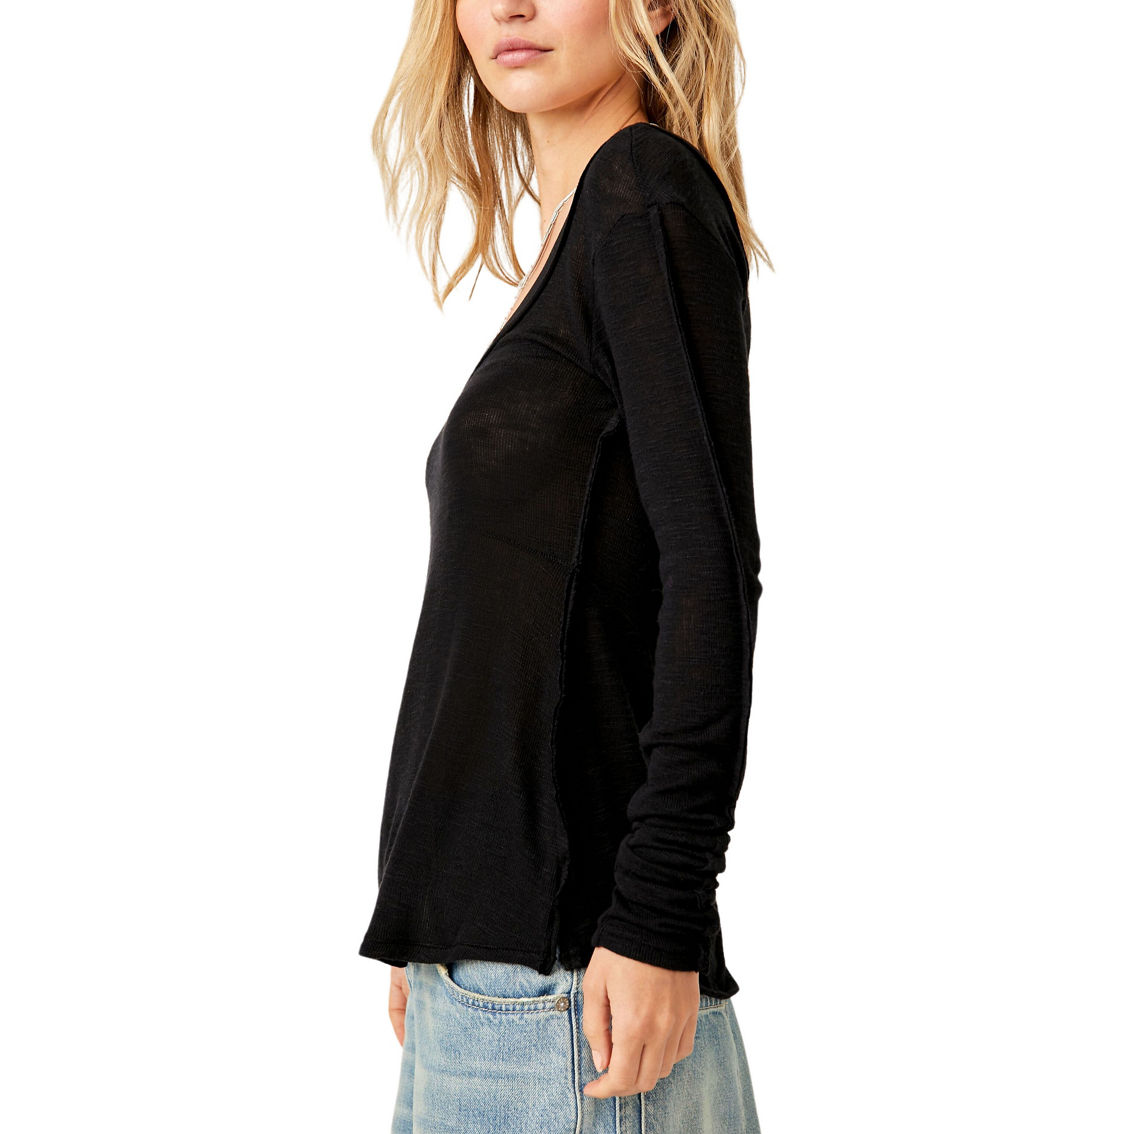 Free People Cabin Fever Layering Top - Image 3 of 4